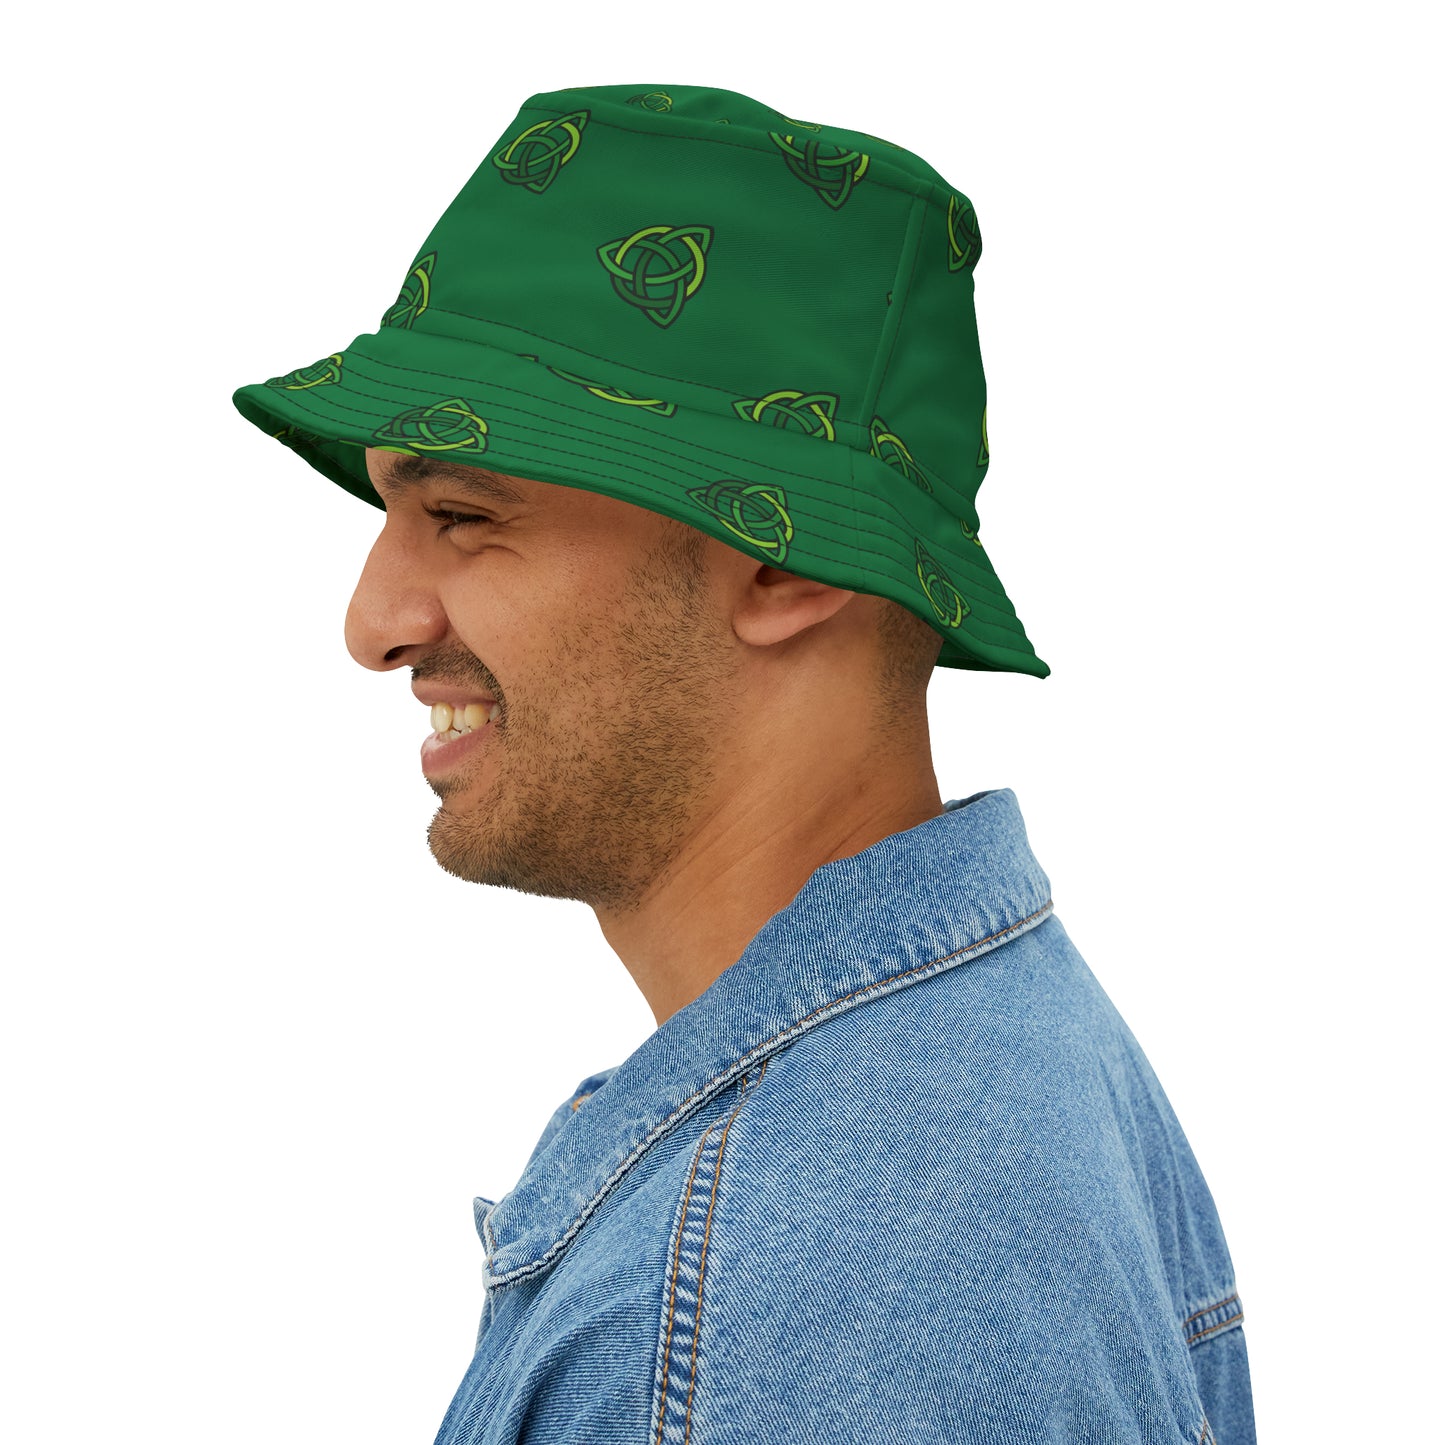 Celtic Cross All Over Print Bucket Hat Great For St. Patrick's Day